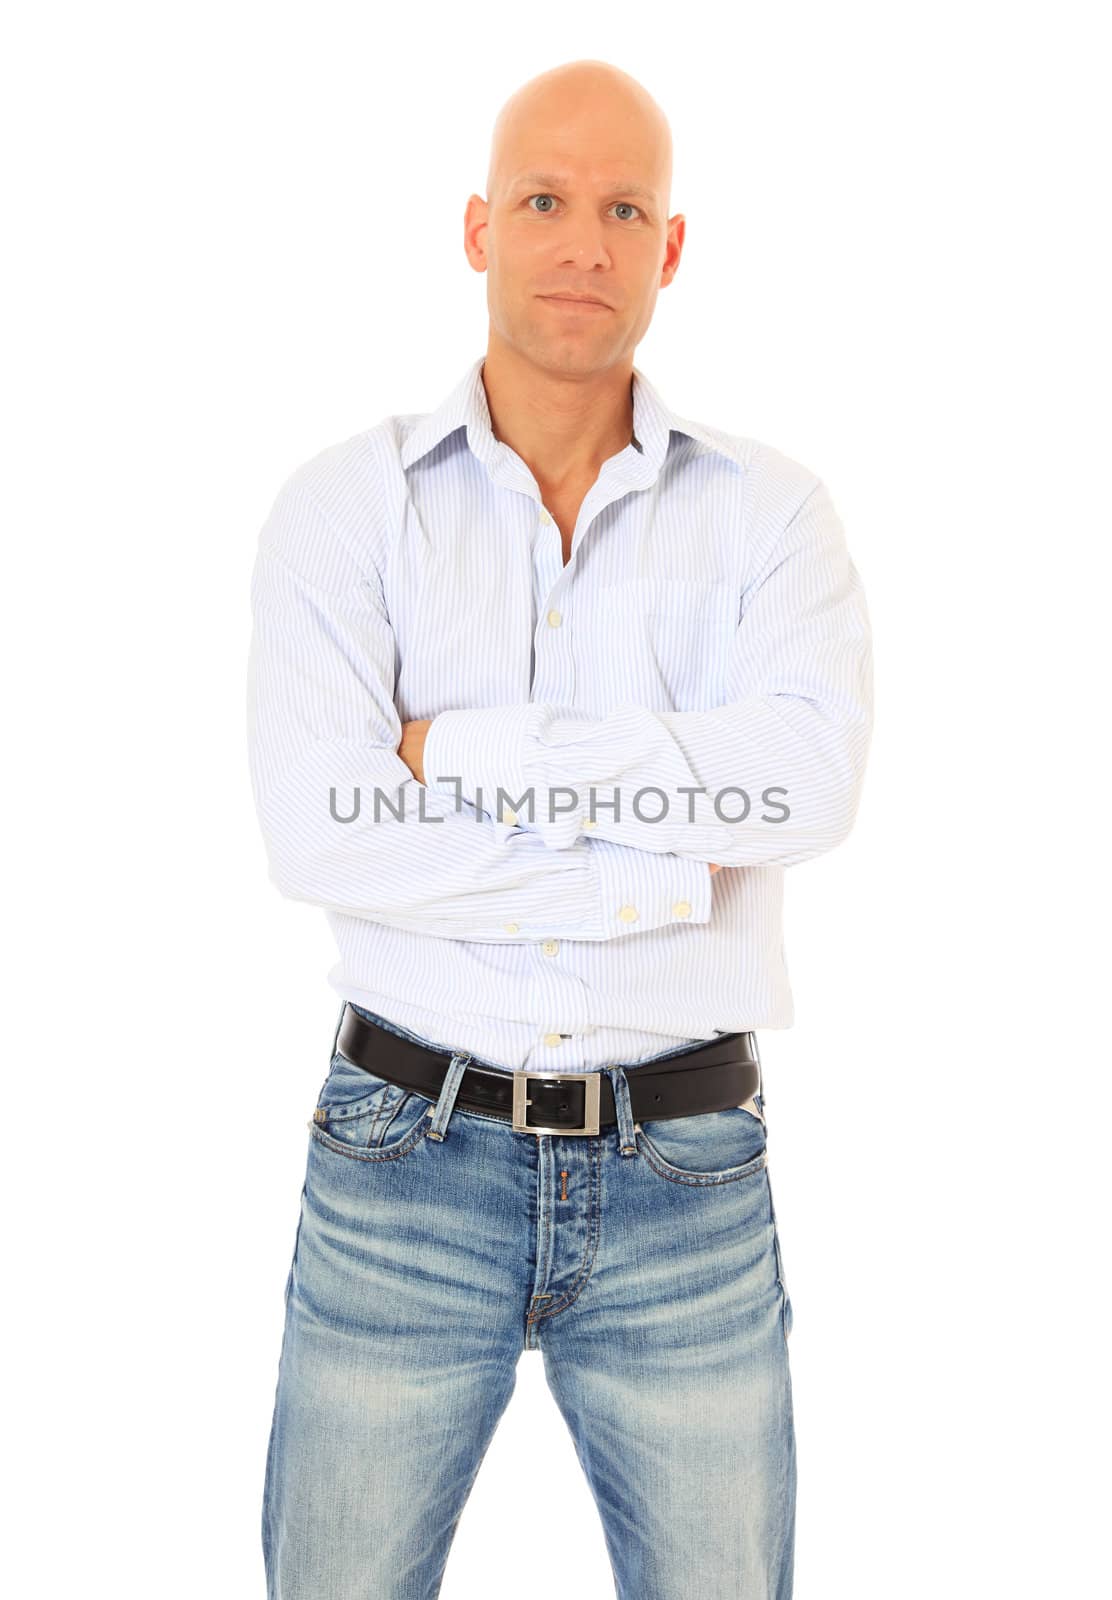 Serious looking man. All on white background.